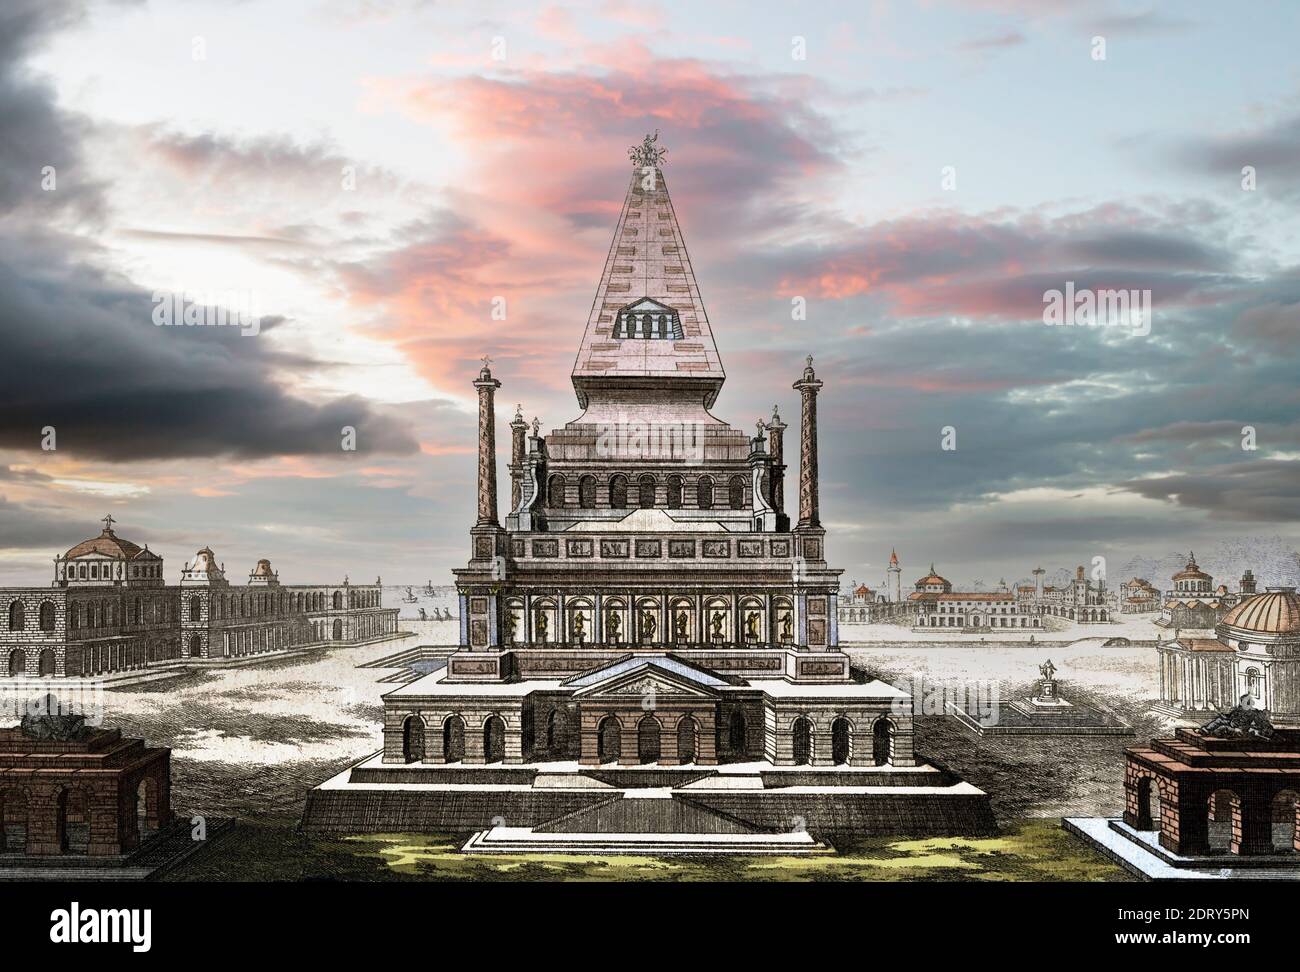 Imaginary reconstruction of the Mausoleum at Halicarnassus or Tomb of Mausolus, one of the Seven Wonders of the Ancient World.    Digital sky added.  After an 18th century work by  Johann Fischer von Erlach. Stock Photo